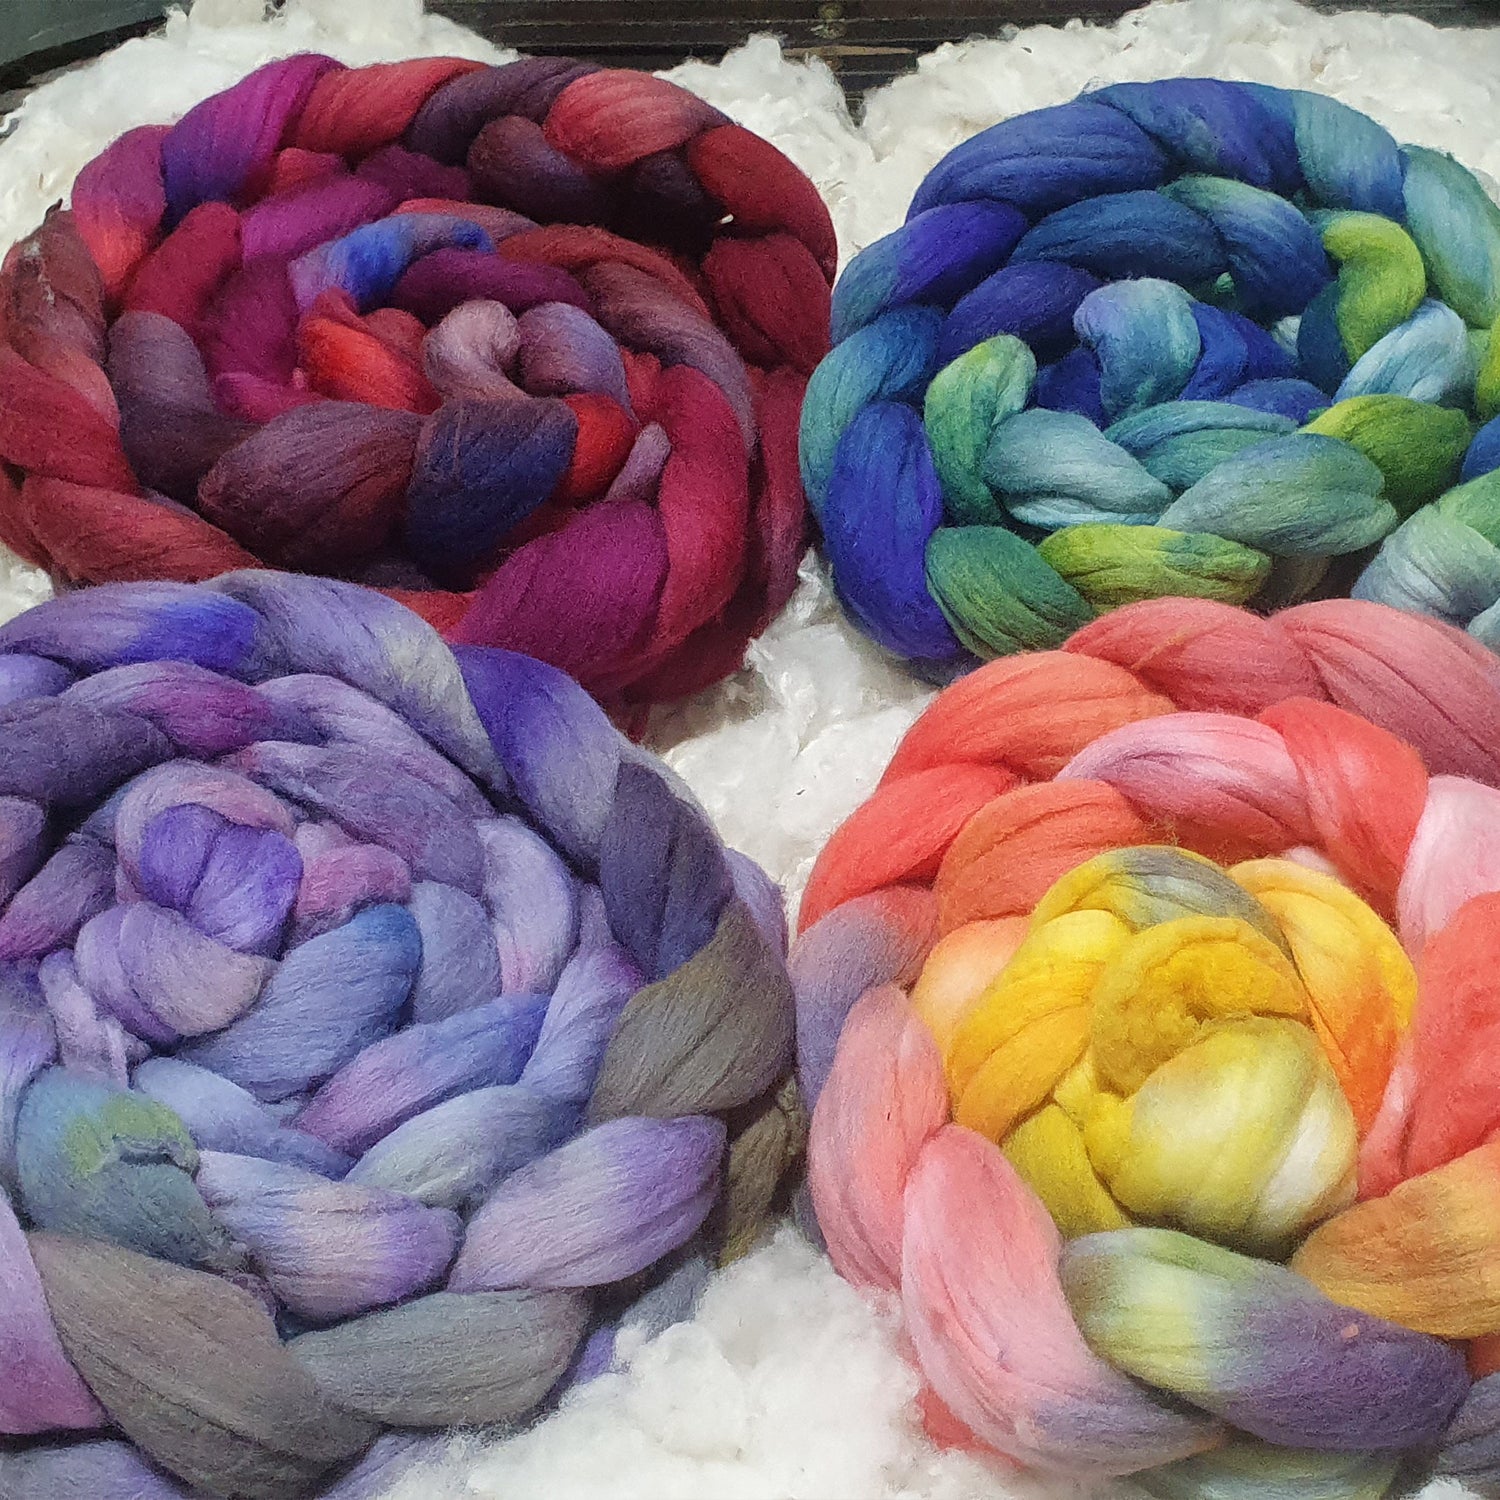 HAND DYED WOOL TOP / SLIVER / ROVING - 200GRAMS